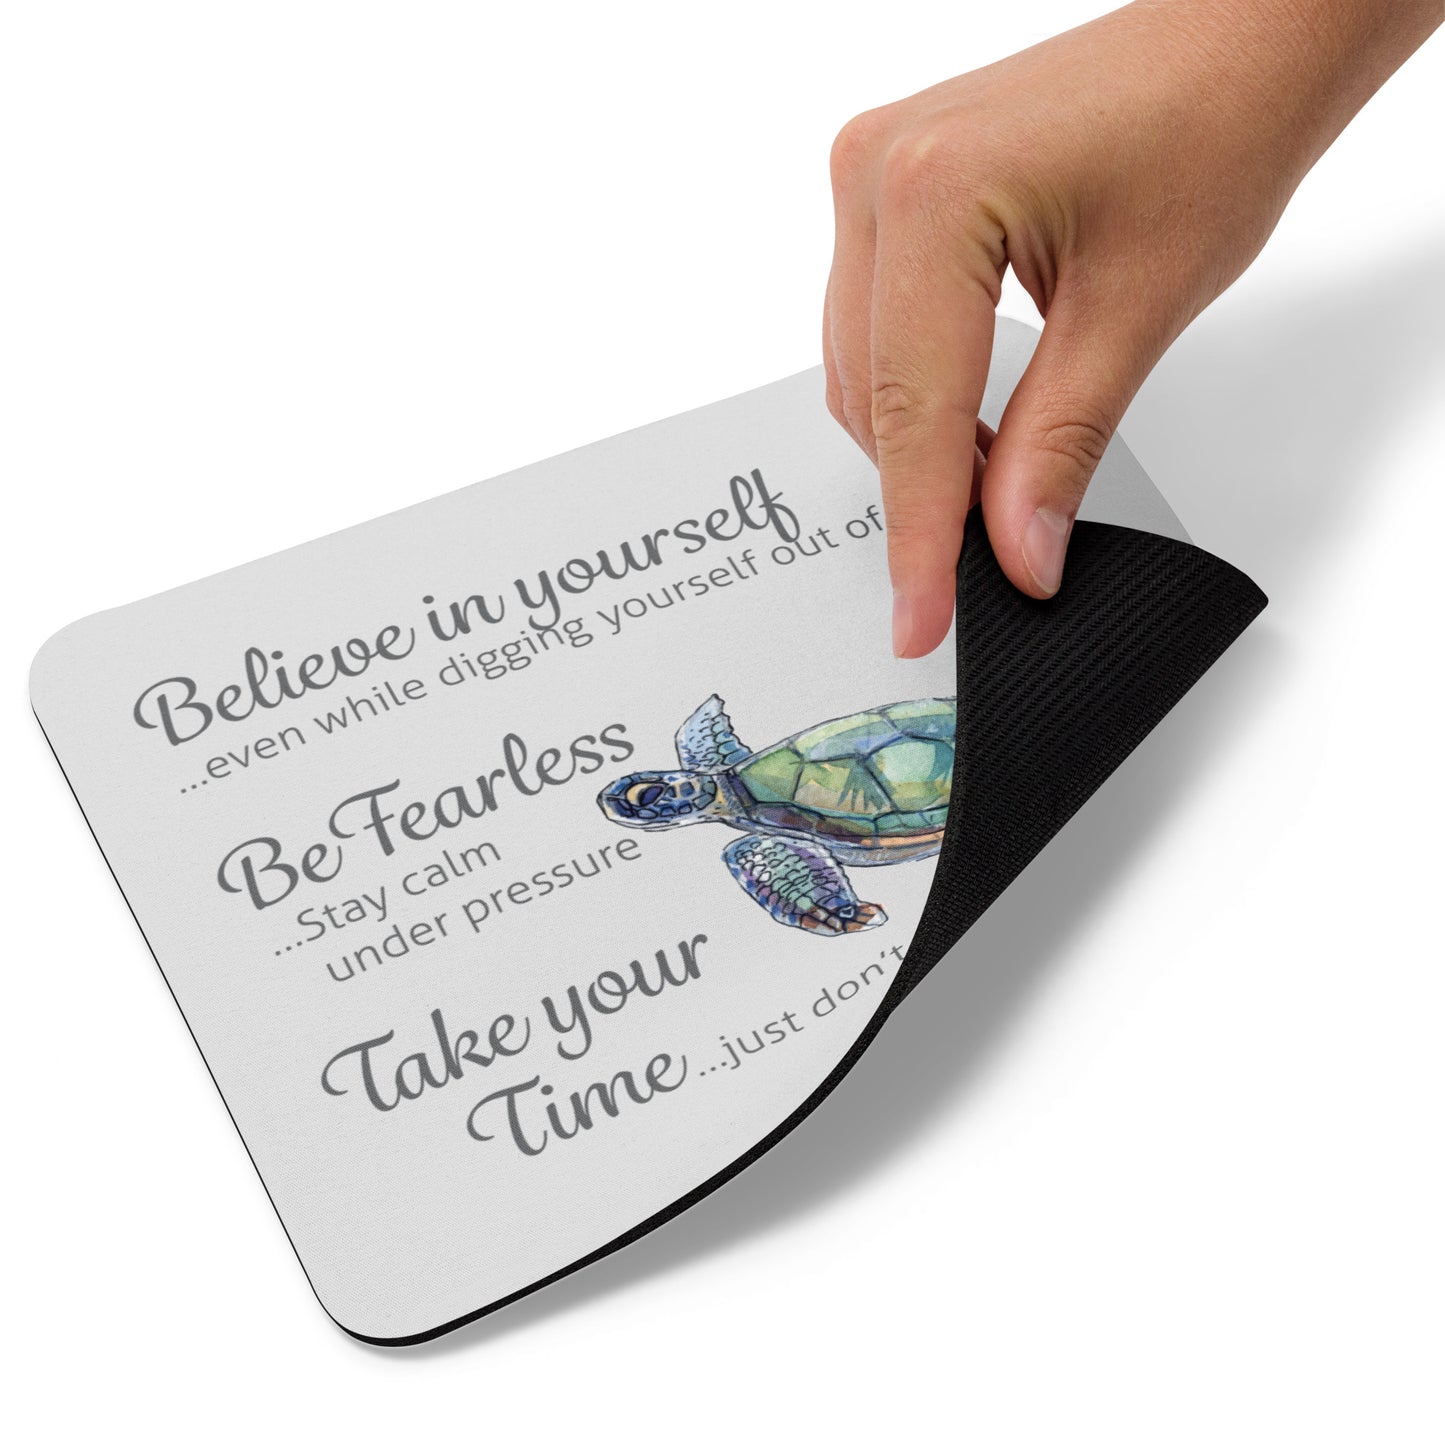 Believe in Yourself PM310 Mouse Pad